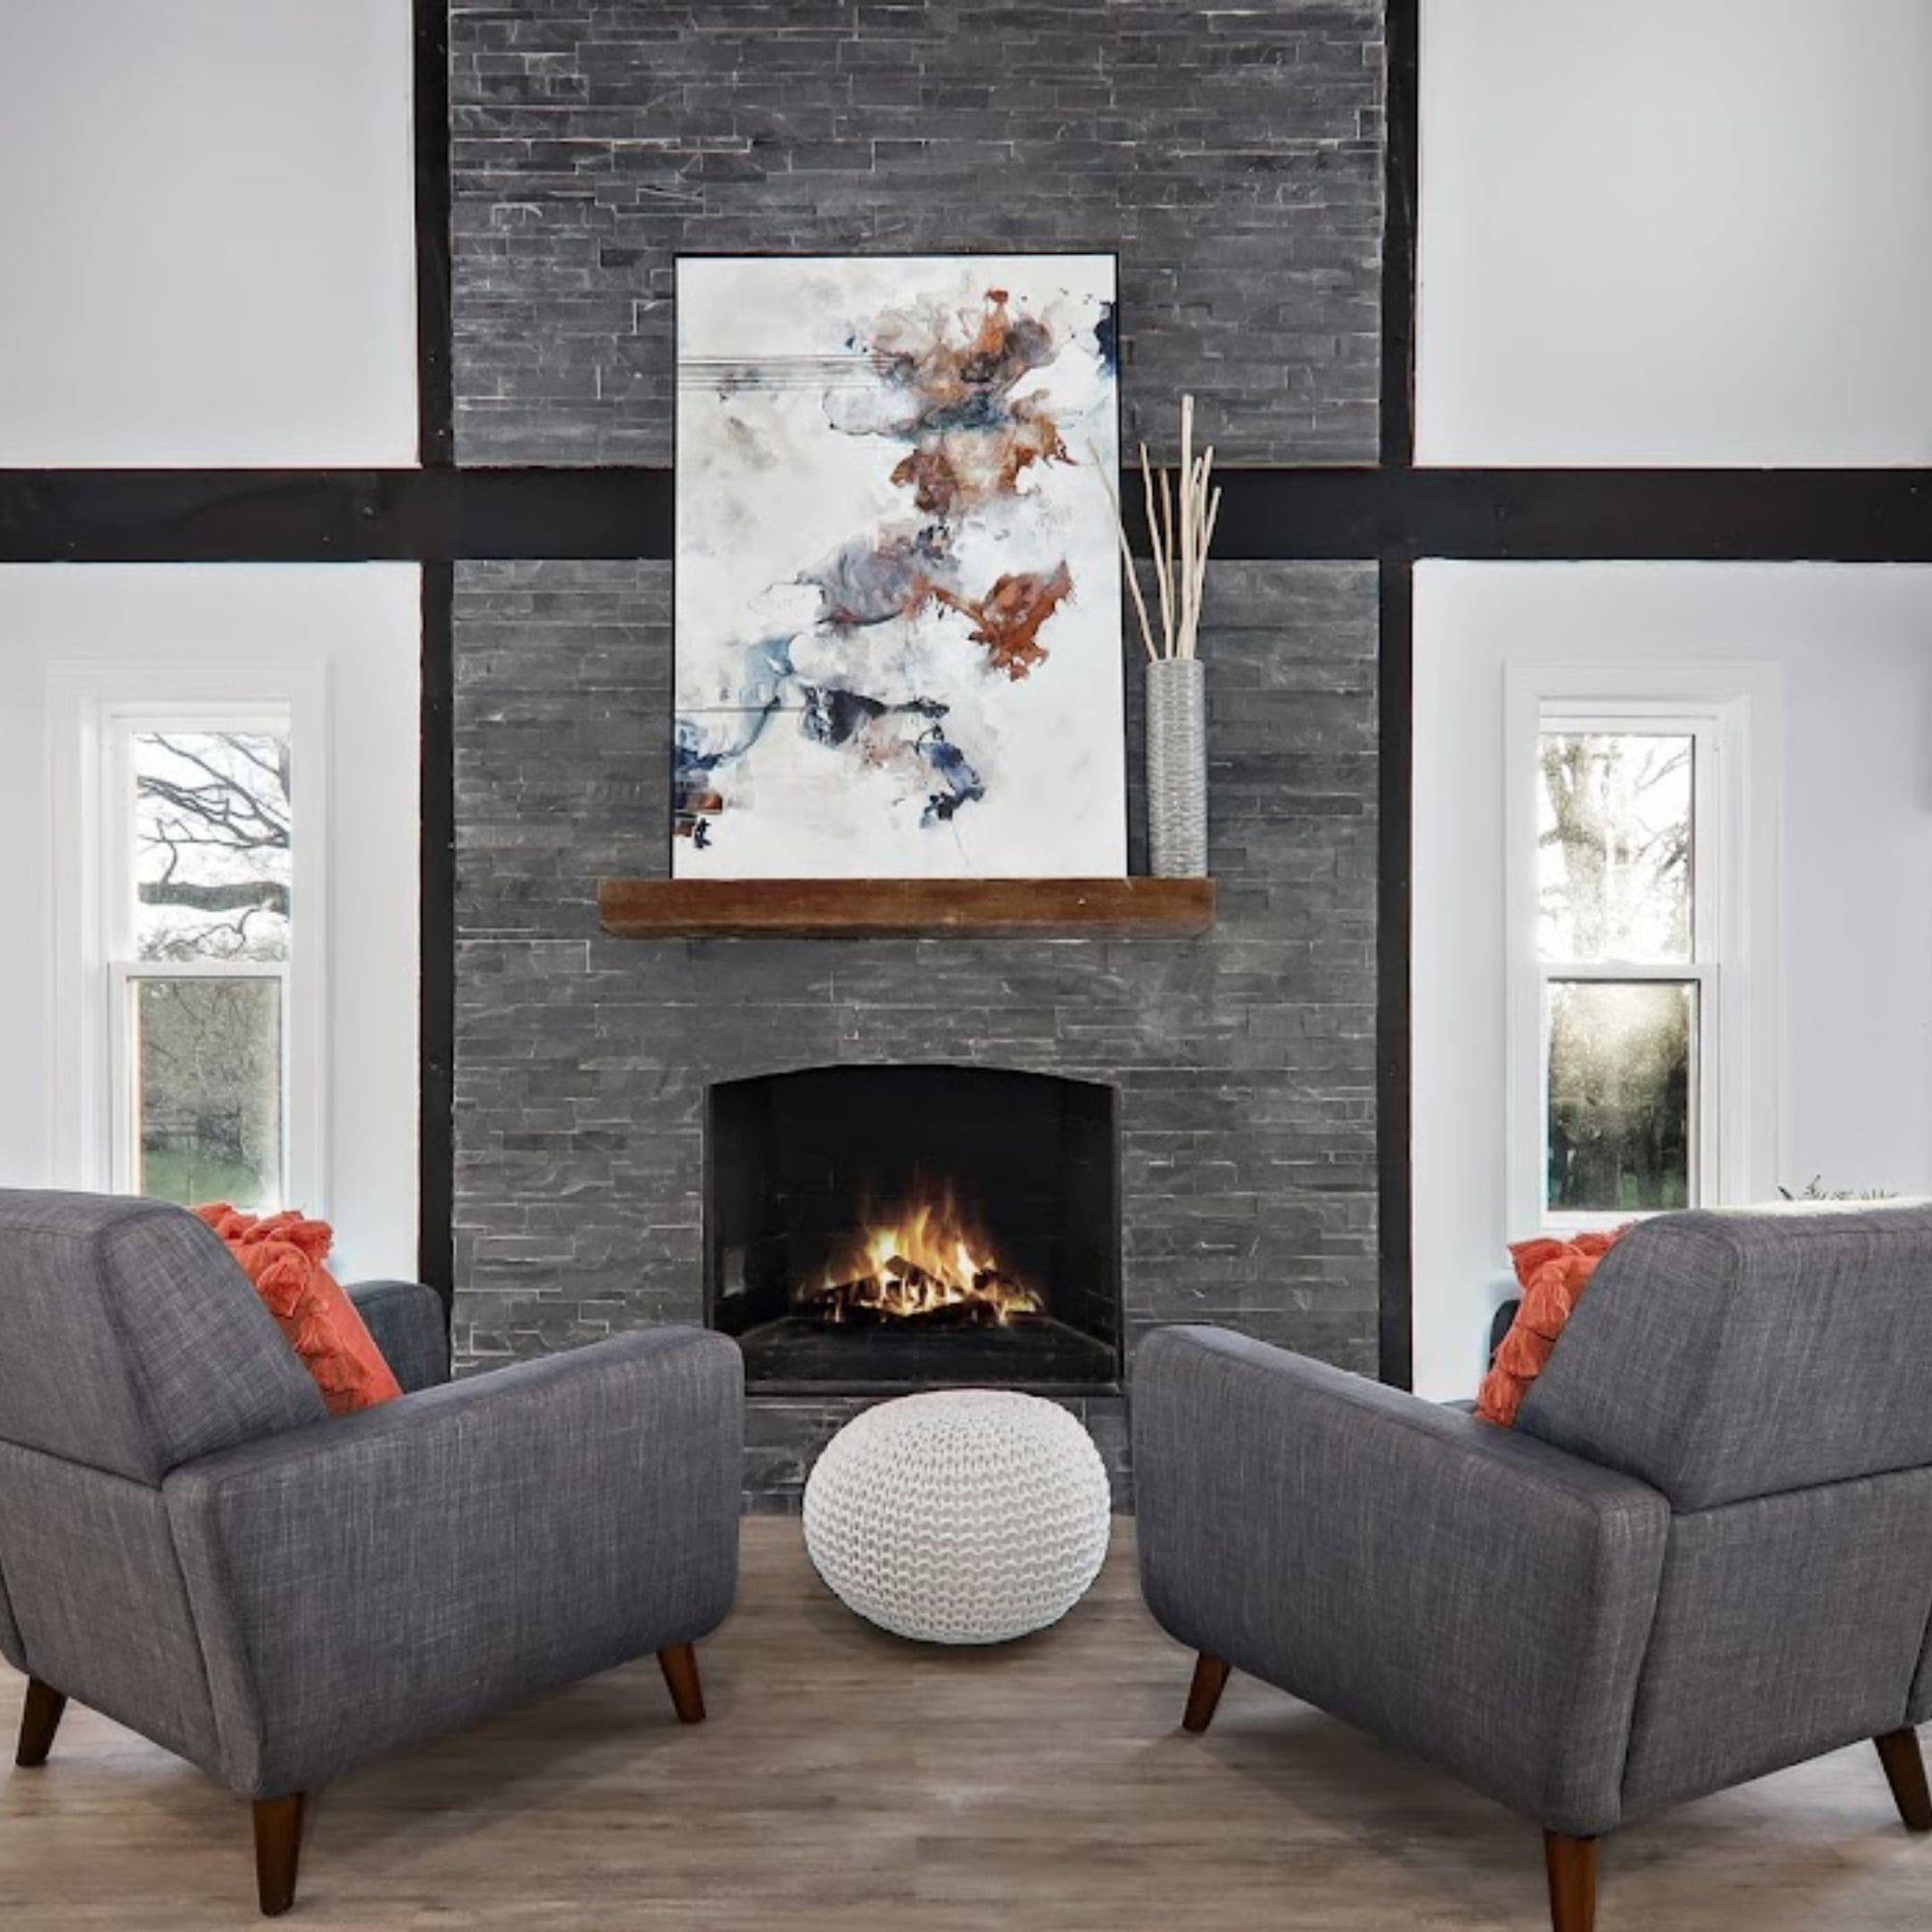 Cozy home staged living room featuring two chairs and a warm fireplace, creating a perfect spot for relaxation.